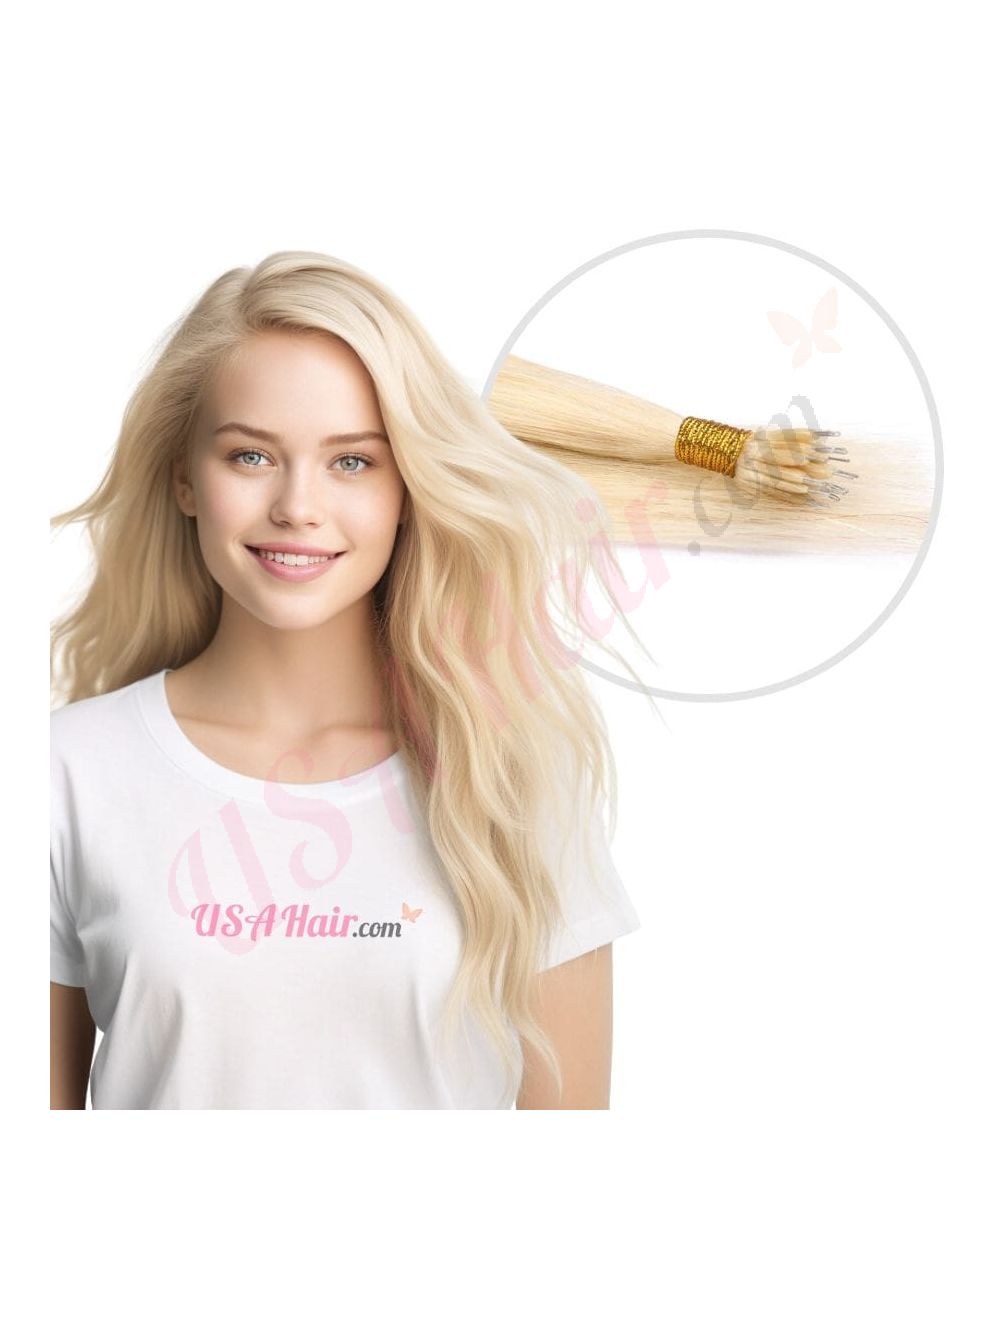 Best Nano Rings Hair Extensions in the USA with free USPS shipping